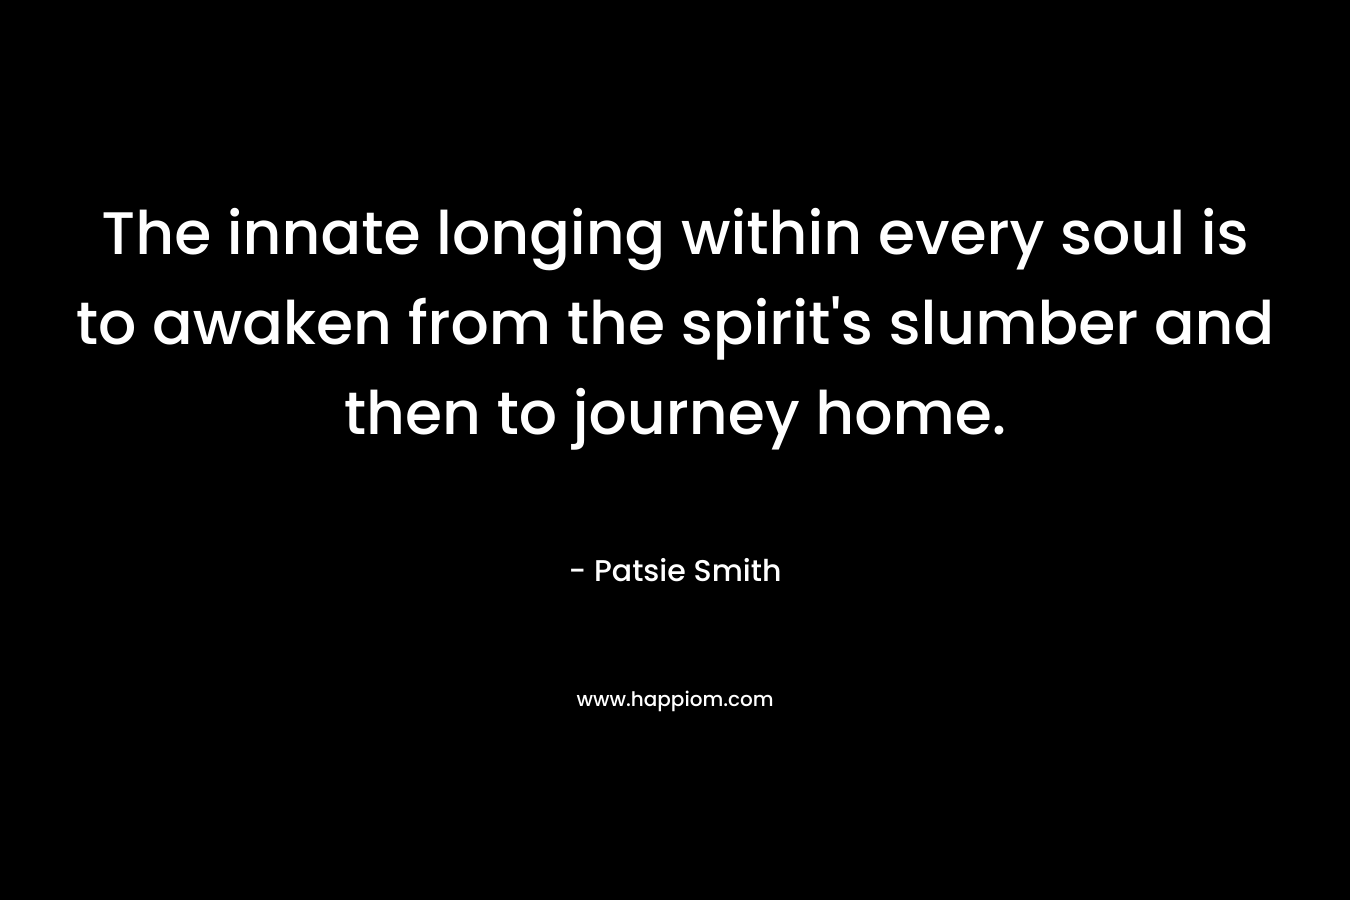 The innate longing within every soul is to awaken from the spirit's slumber and then to journey home.